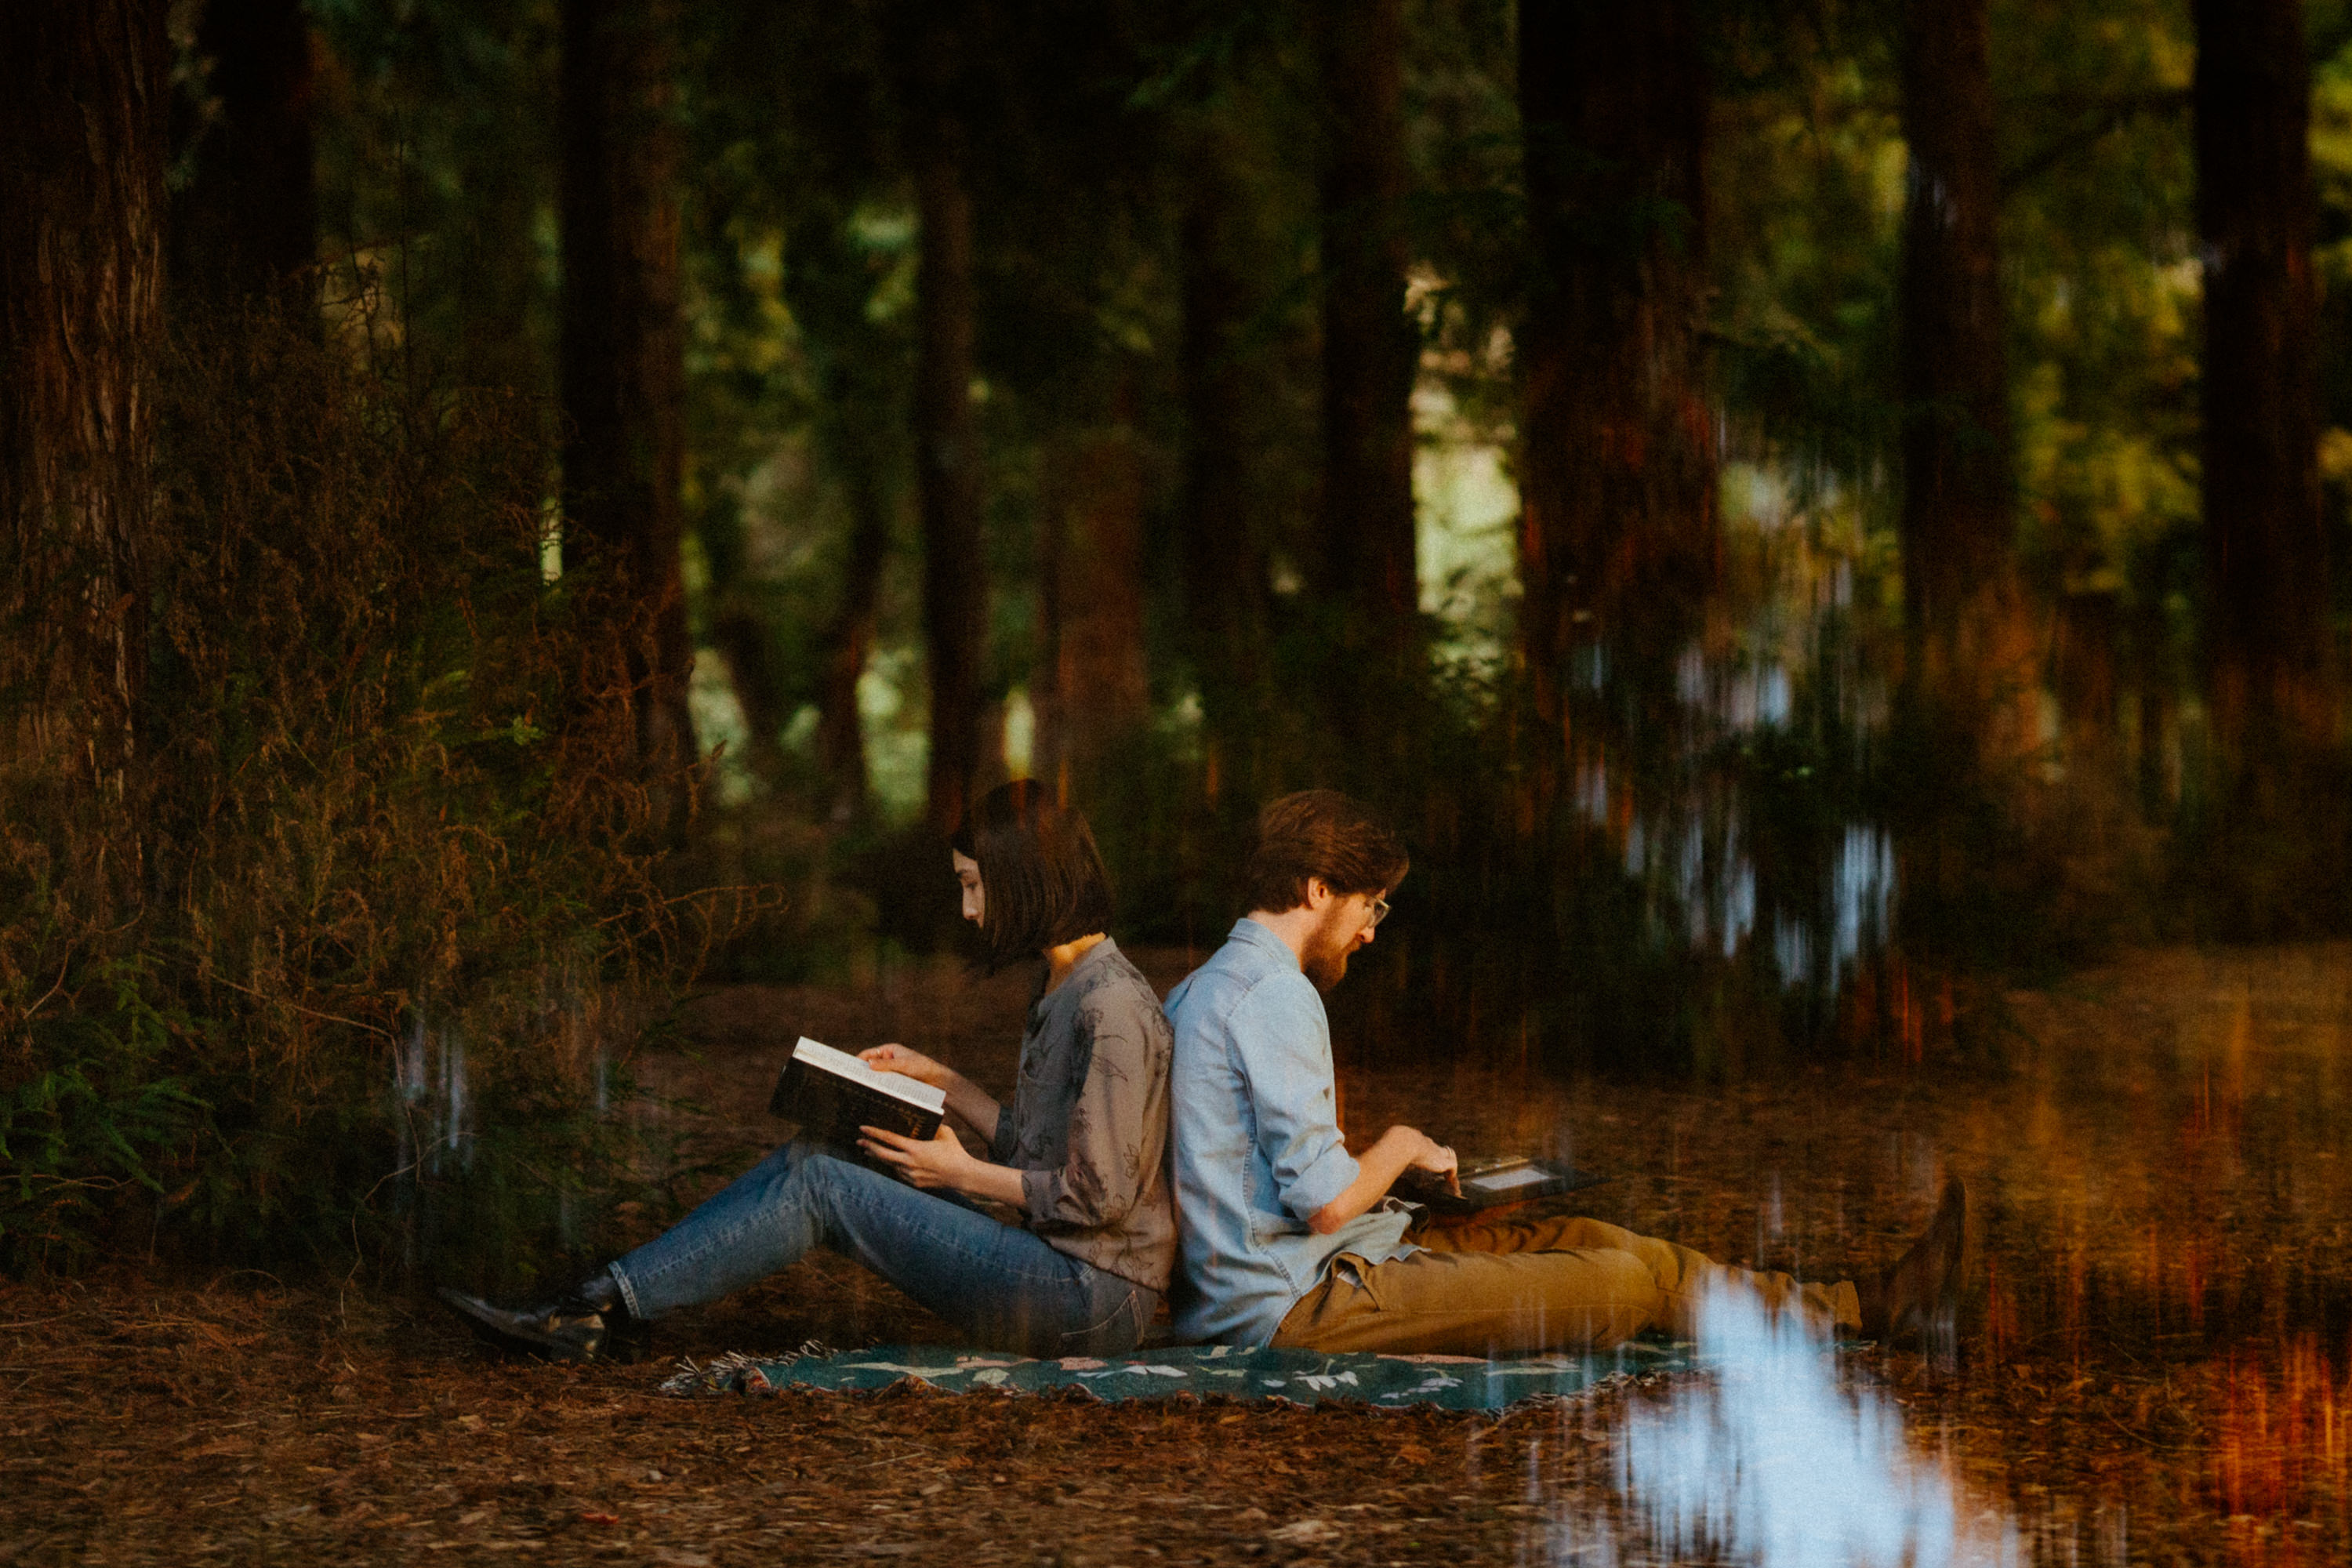 Serene and peaceful reading atmosphere during the couple's Carbon Canyon engagement shoot.